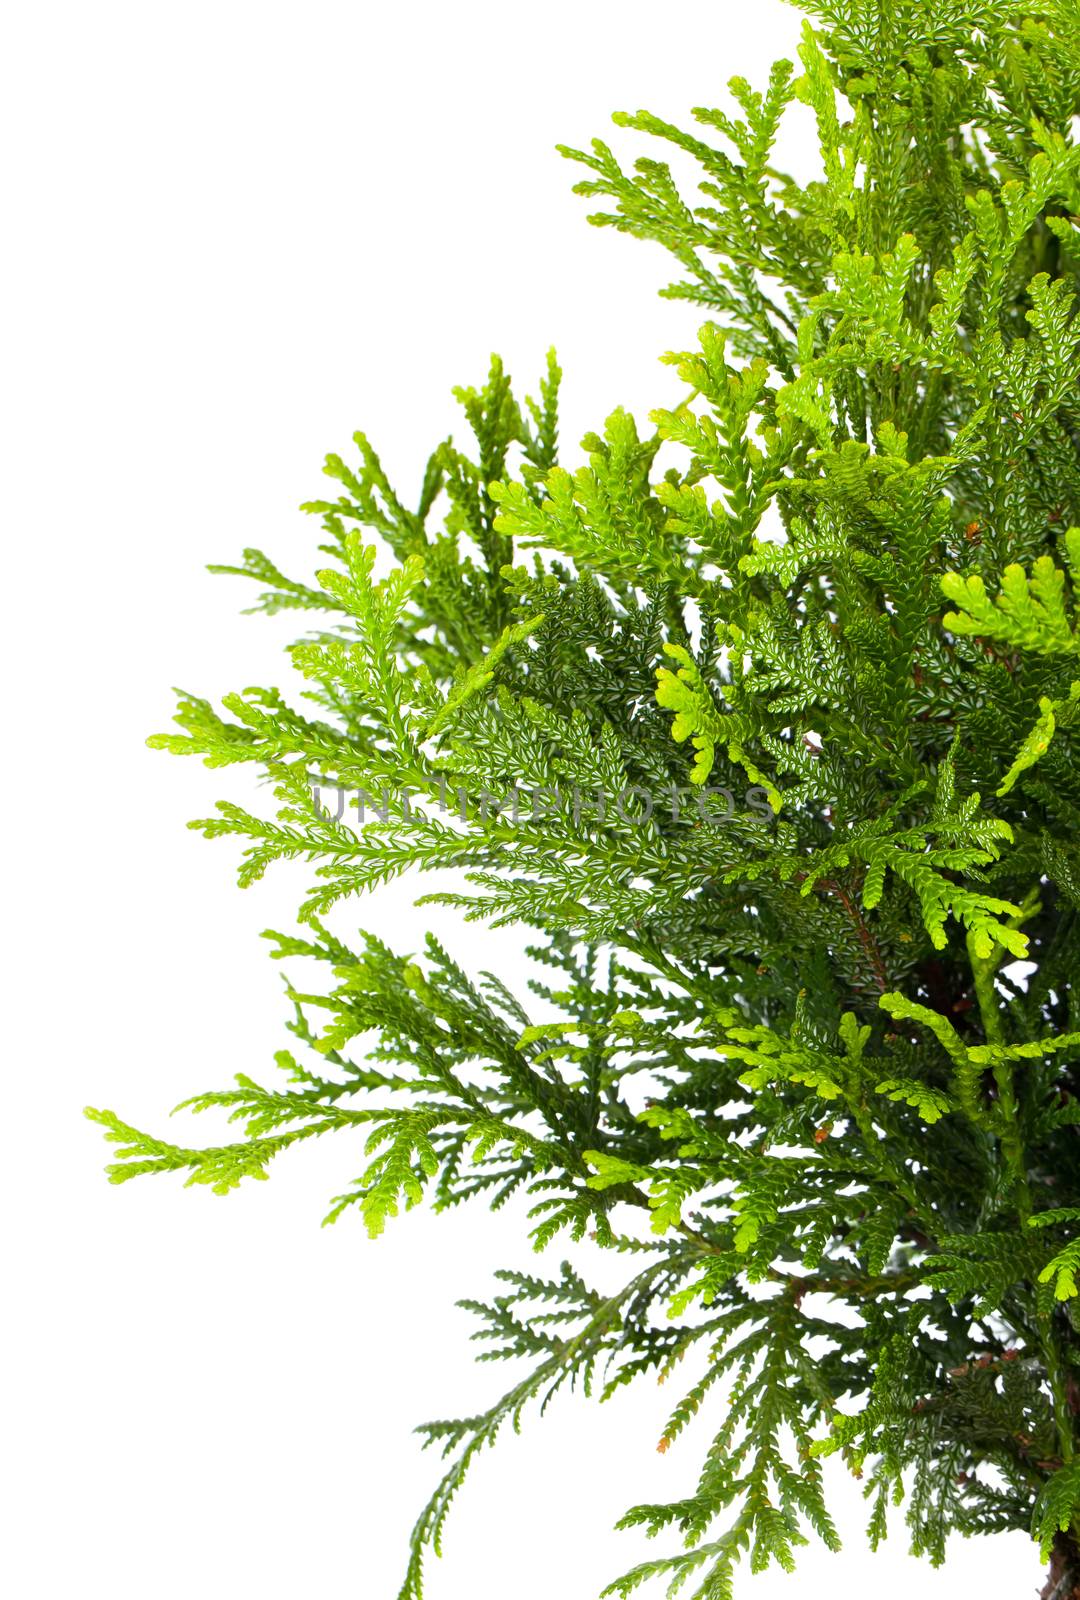 Thujopsis is a conifer in the cypress family Cupressaceae